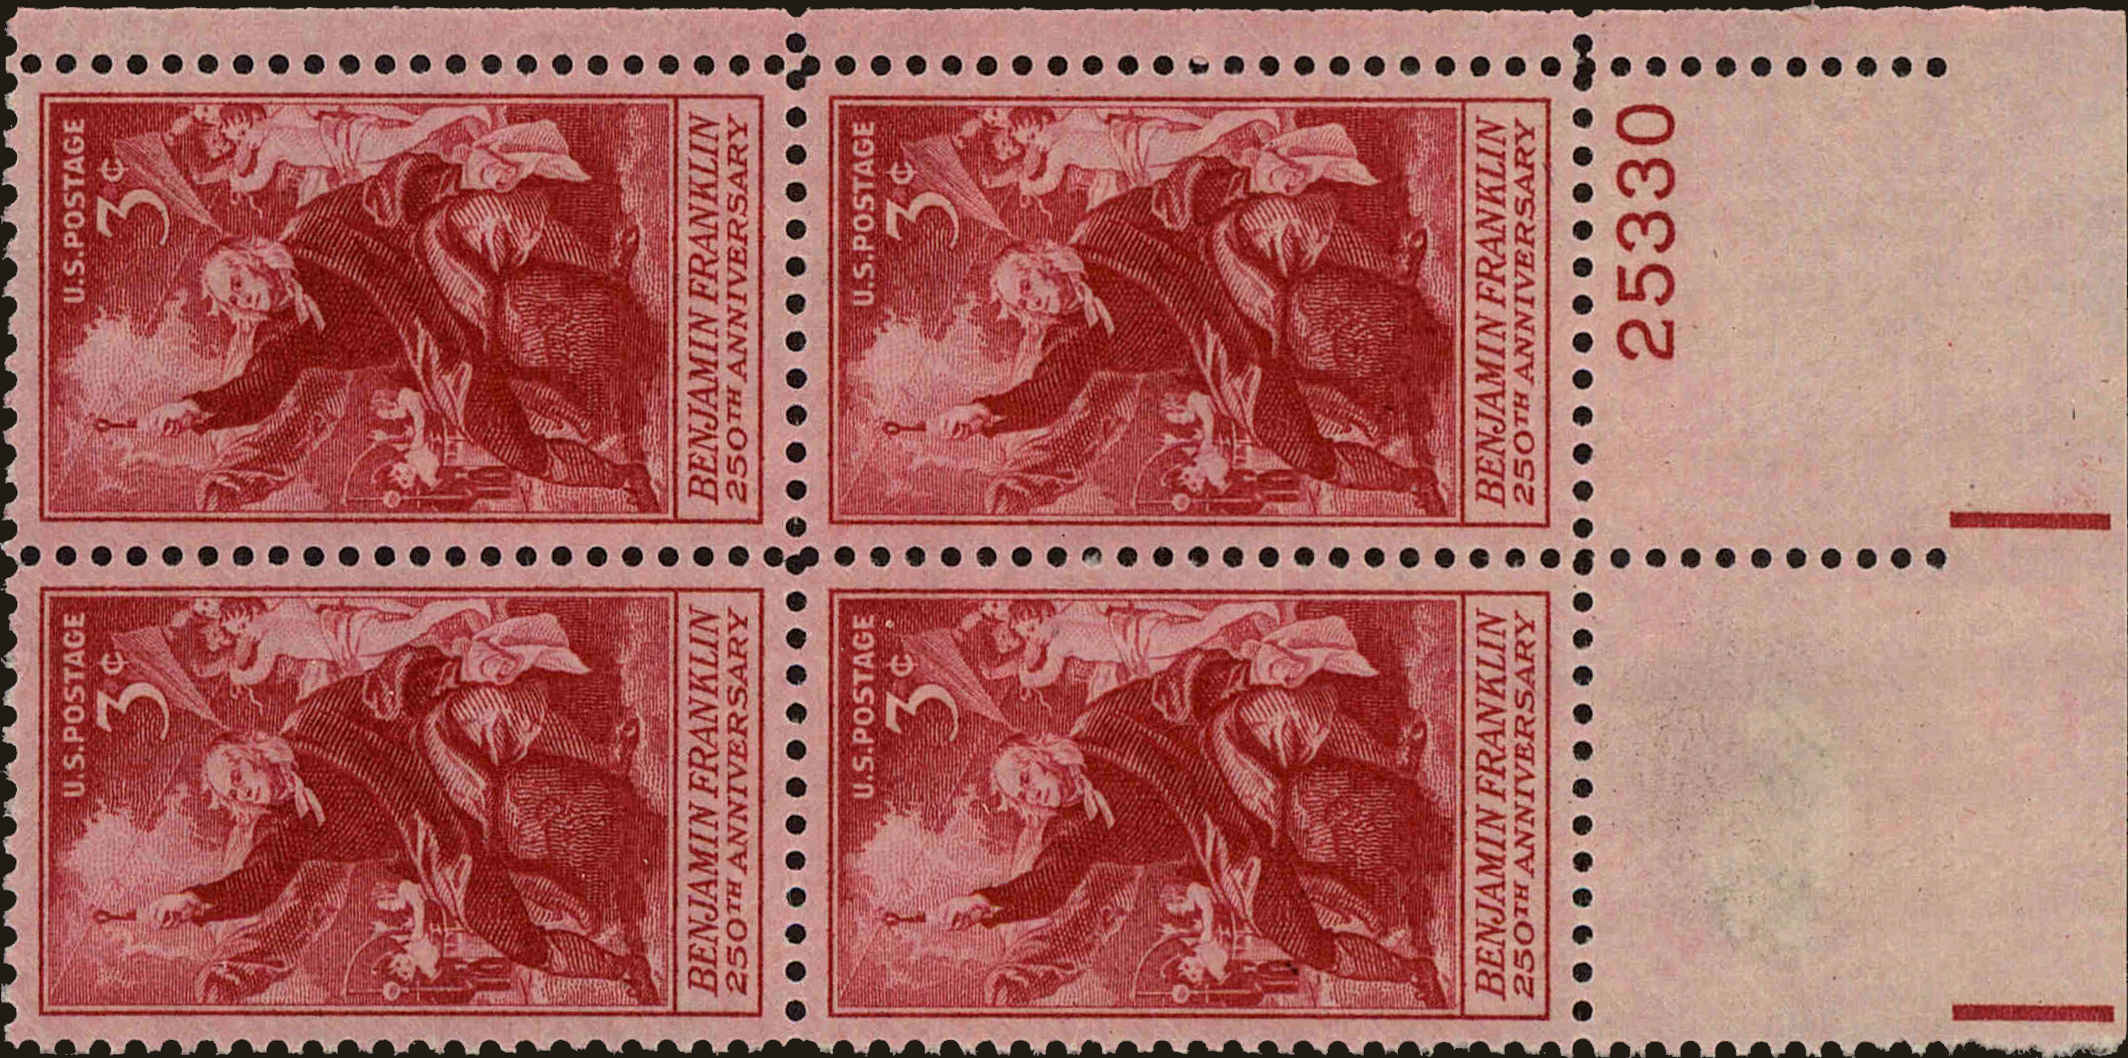 Front view of United States 1073 collectors stamp